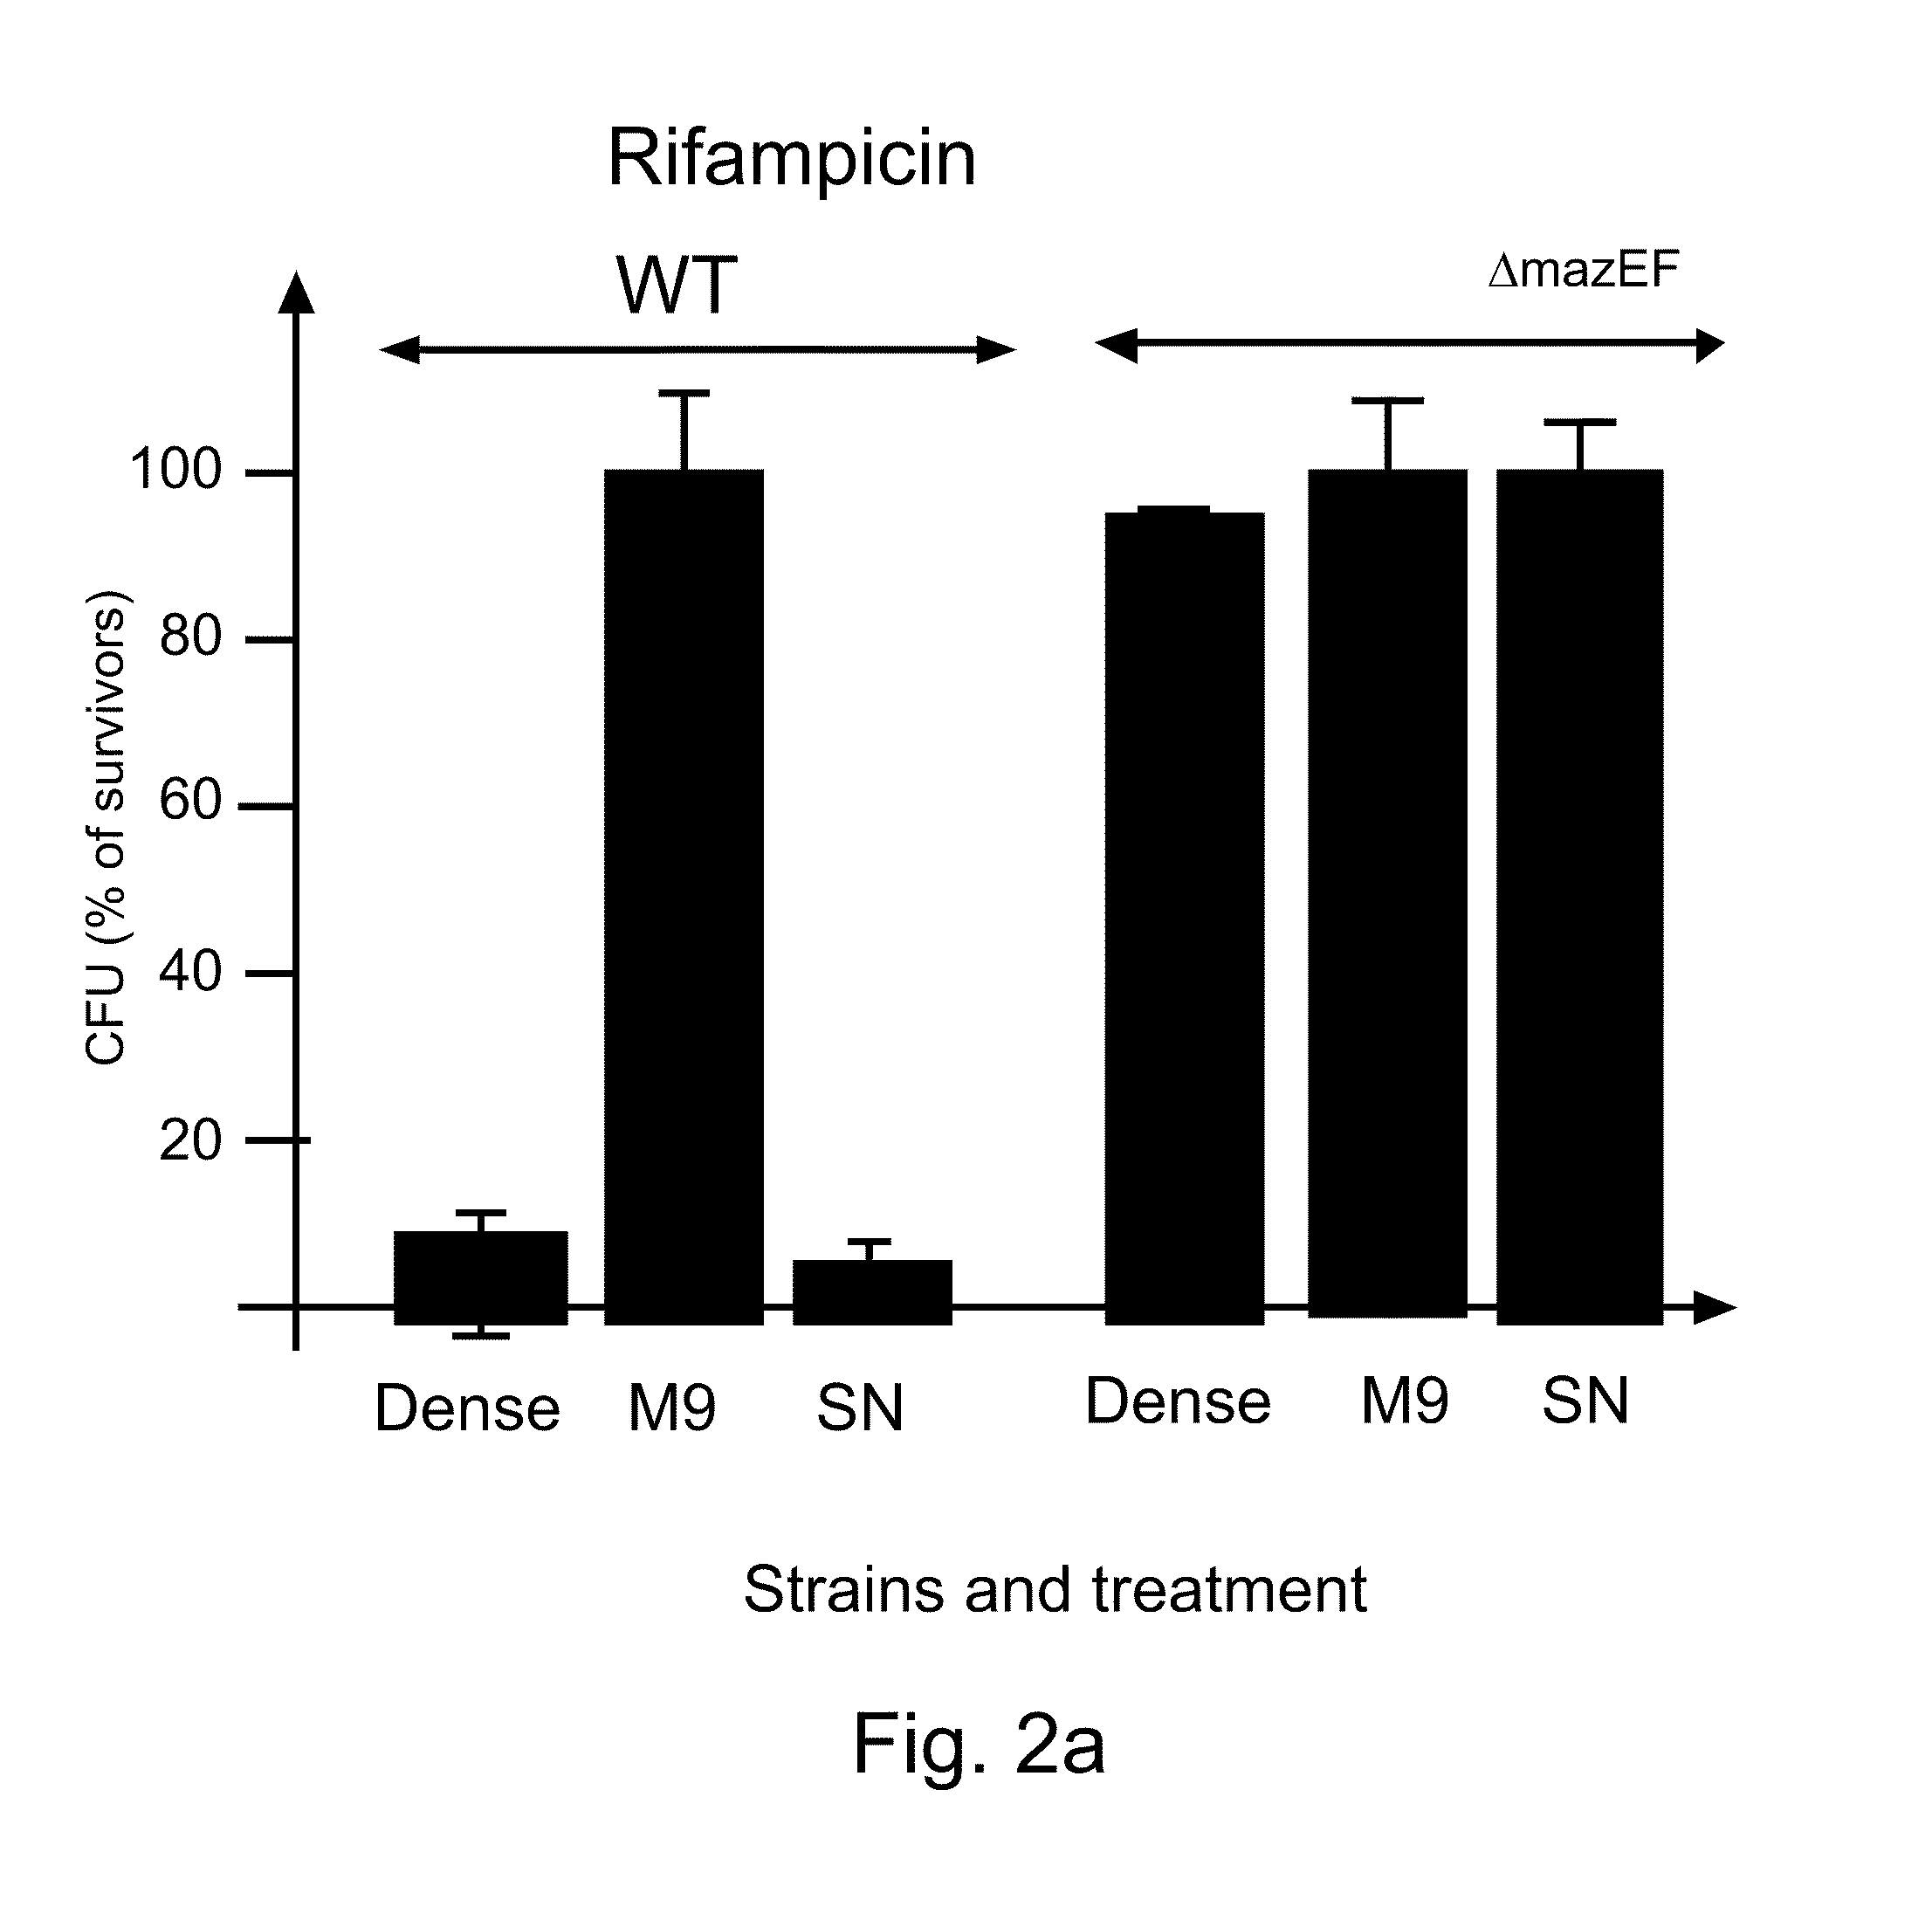 Anti-bacterial peptides and methods of treating diseases using same